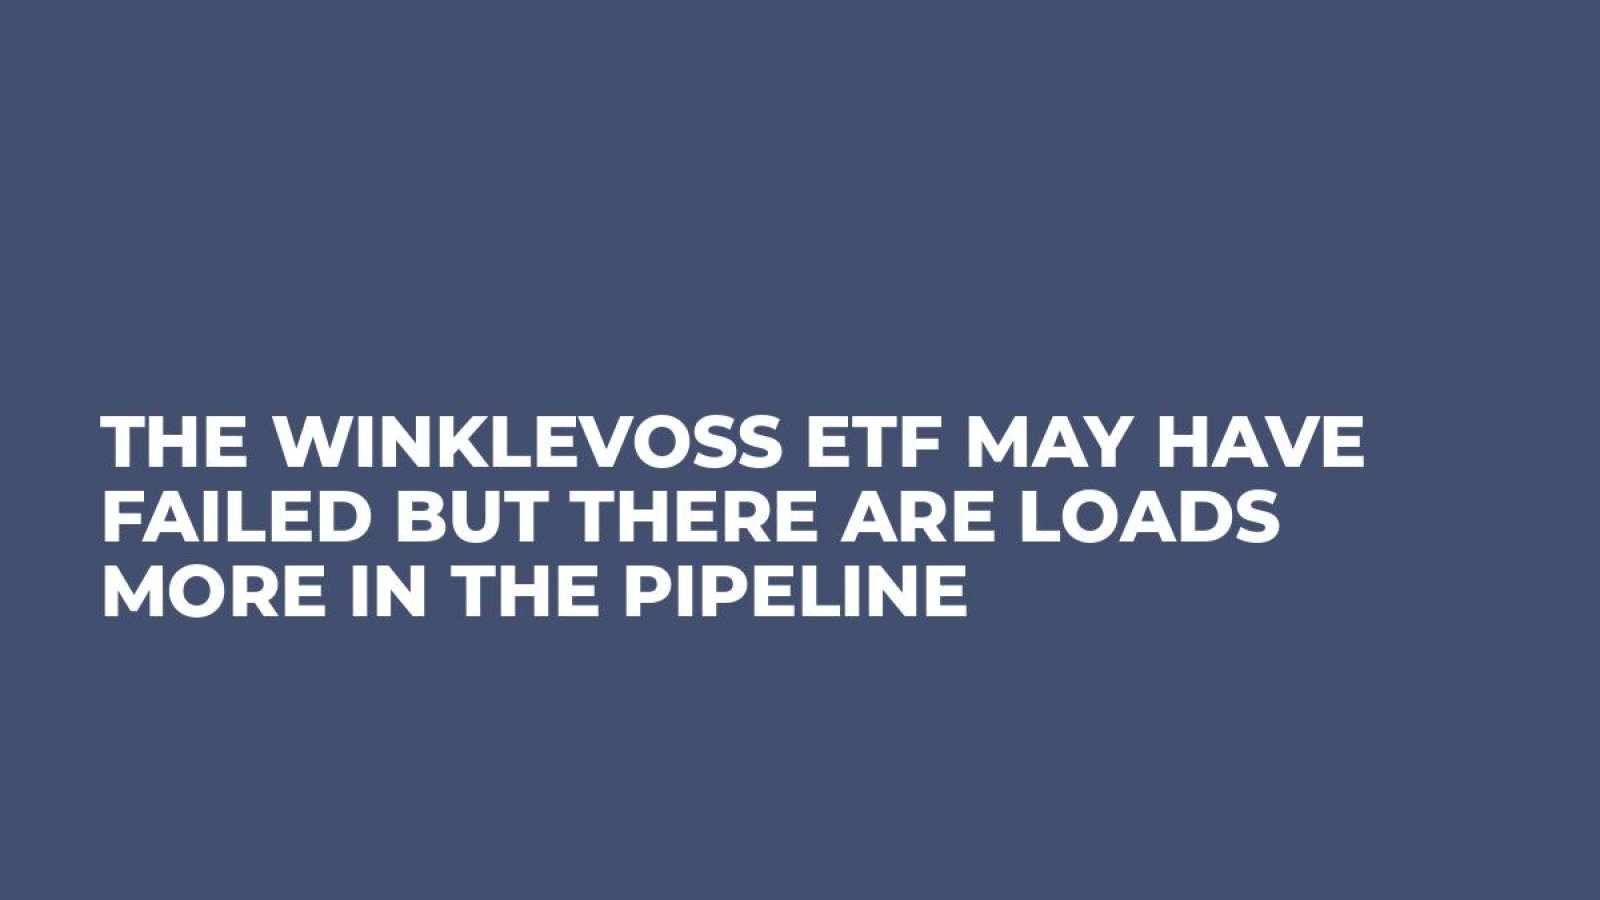 The Winklevoss ETF May Have Failed But There Are Loads More in the Pipeline